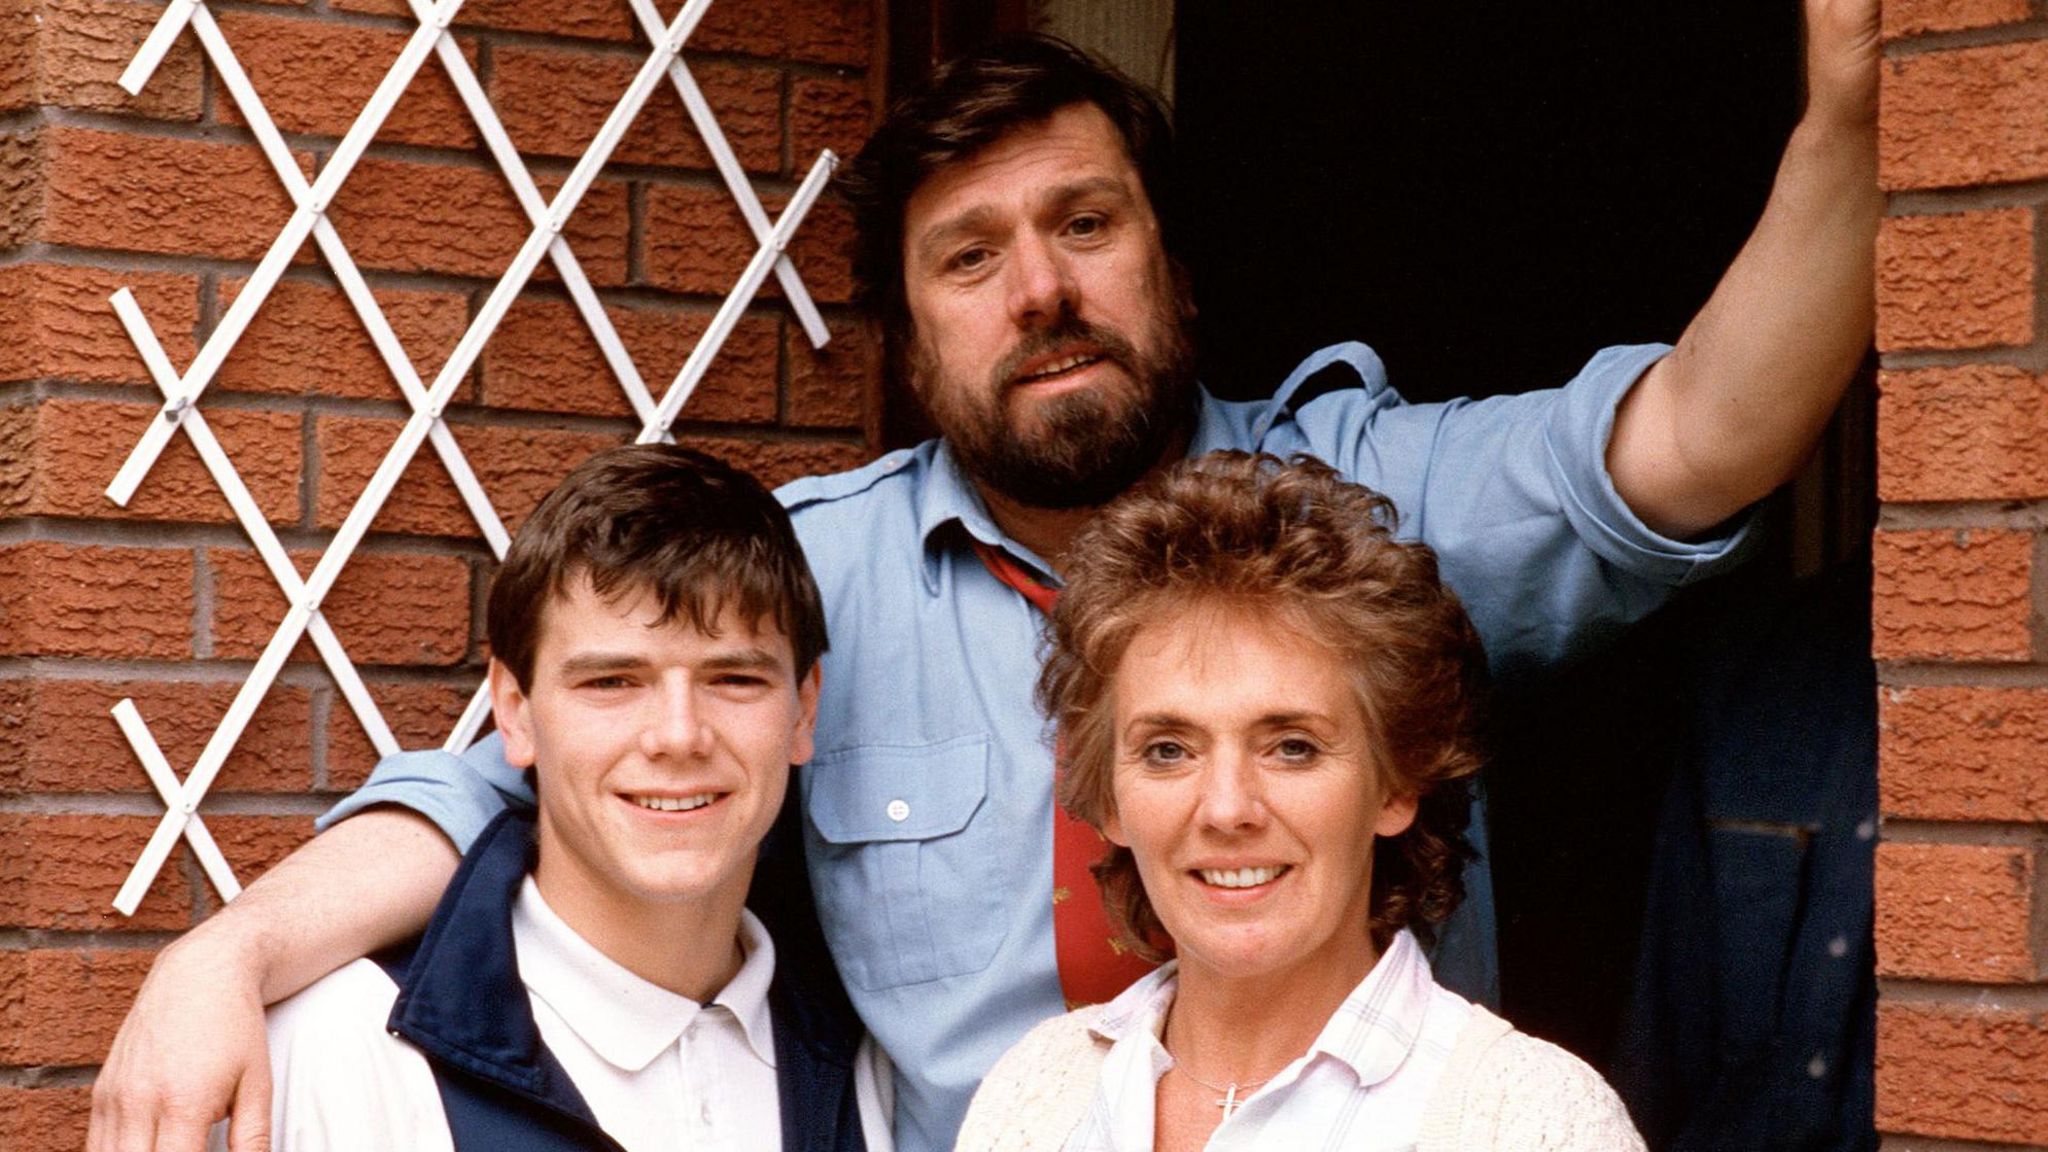 Simon O'Brien as Damon Grant, Ricky Tomlinson as Bobby Grant and Sue Johnston as Sheila Grant in the Channel 4 soap opera Brookside